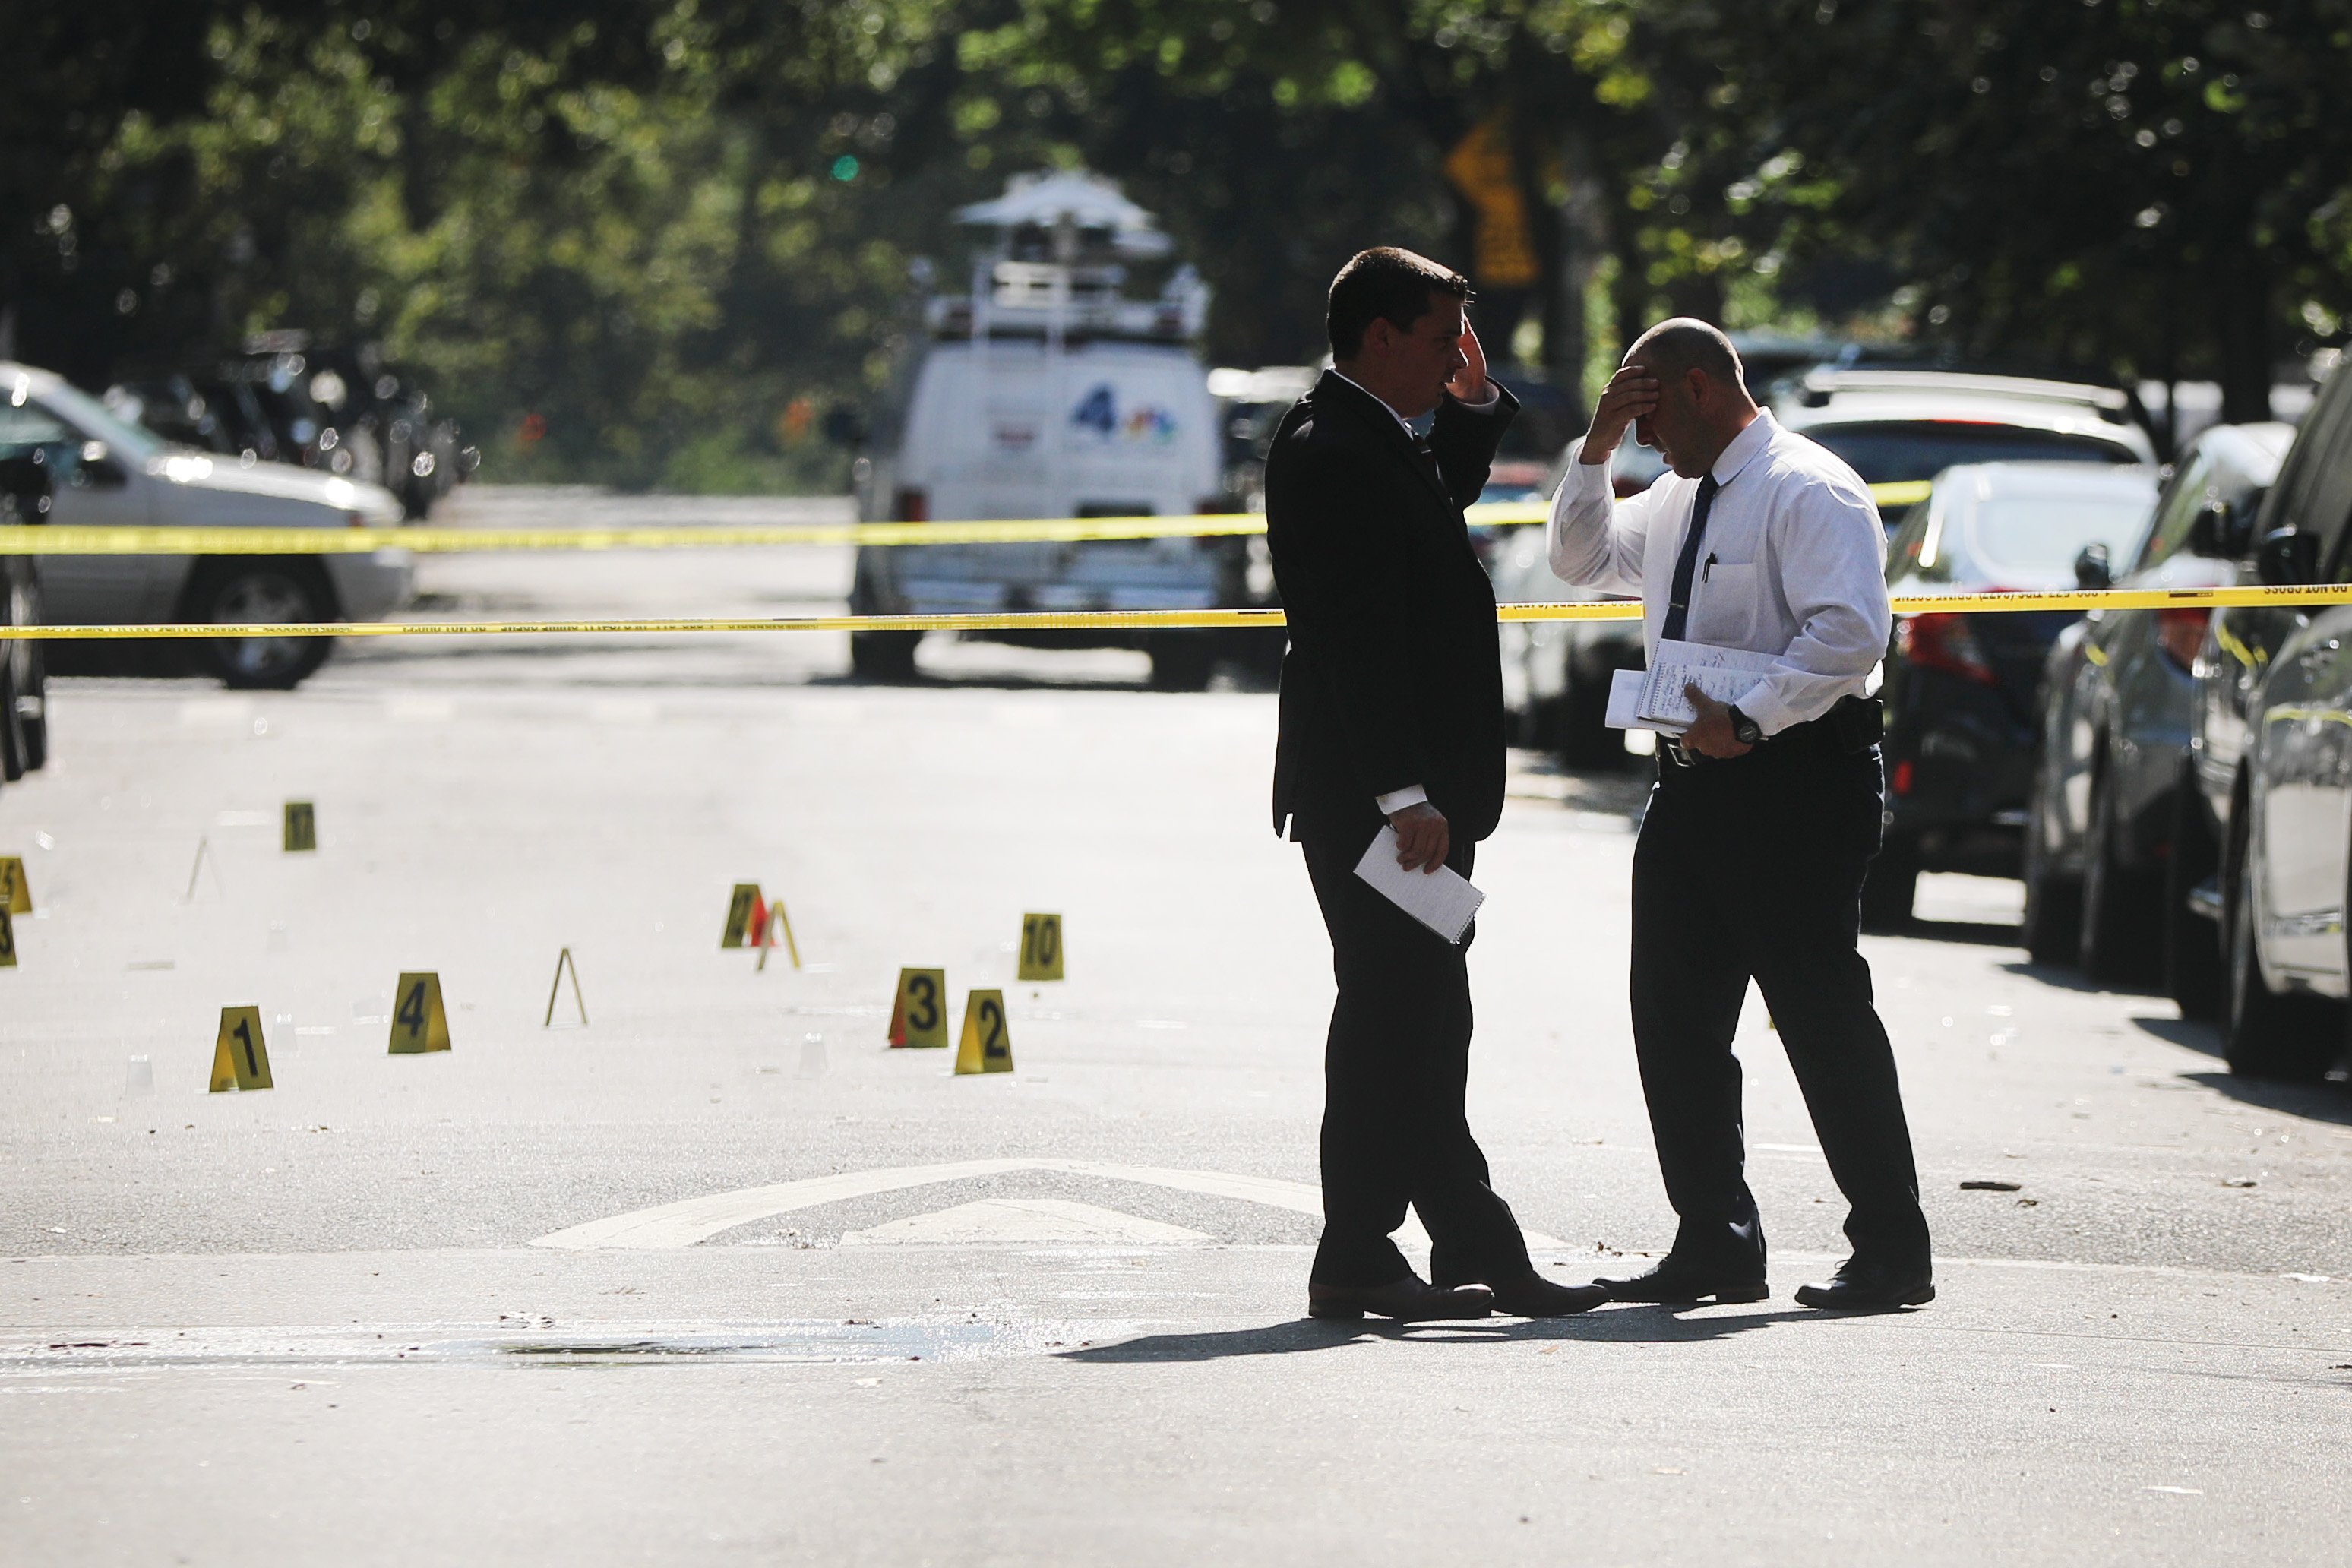 Police work at a crime scene in Brooklyn where a one year old child was shot and killed on July 13, 2020 in New York City. The 1-year-old boy was shot near a playground during a Sunday picnic when gunfire erupted. Two adults were wounded in the evening shooting. New York City has witnessed a surge in gun violence over the past month with 9 people killed, including children, and 41 others wounded on the Fourth of July weekend alone. The gun violence is occurring against the backdrop of a nationwide movement to consider defunding police departments. (Photo by Spencer Platt/Getty Images)